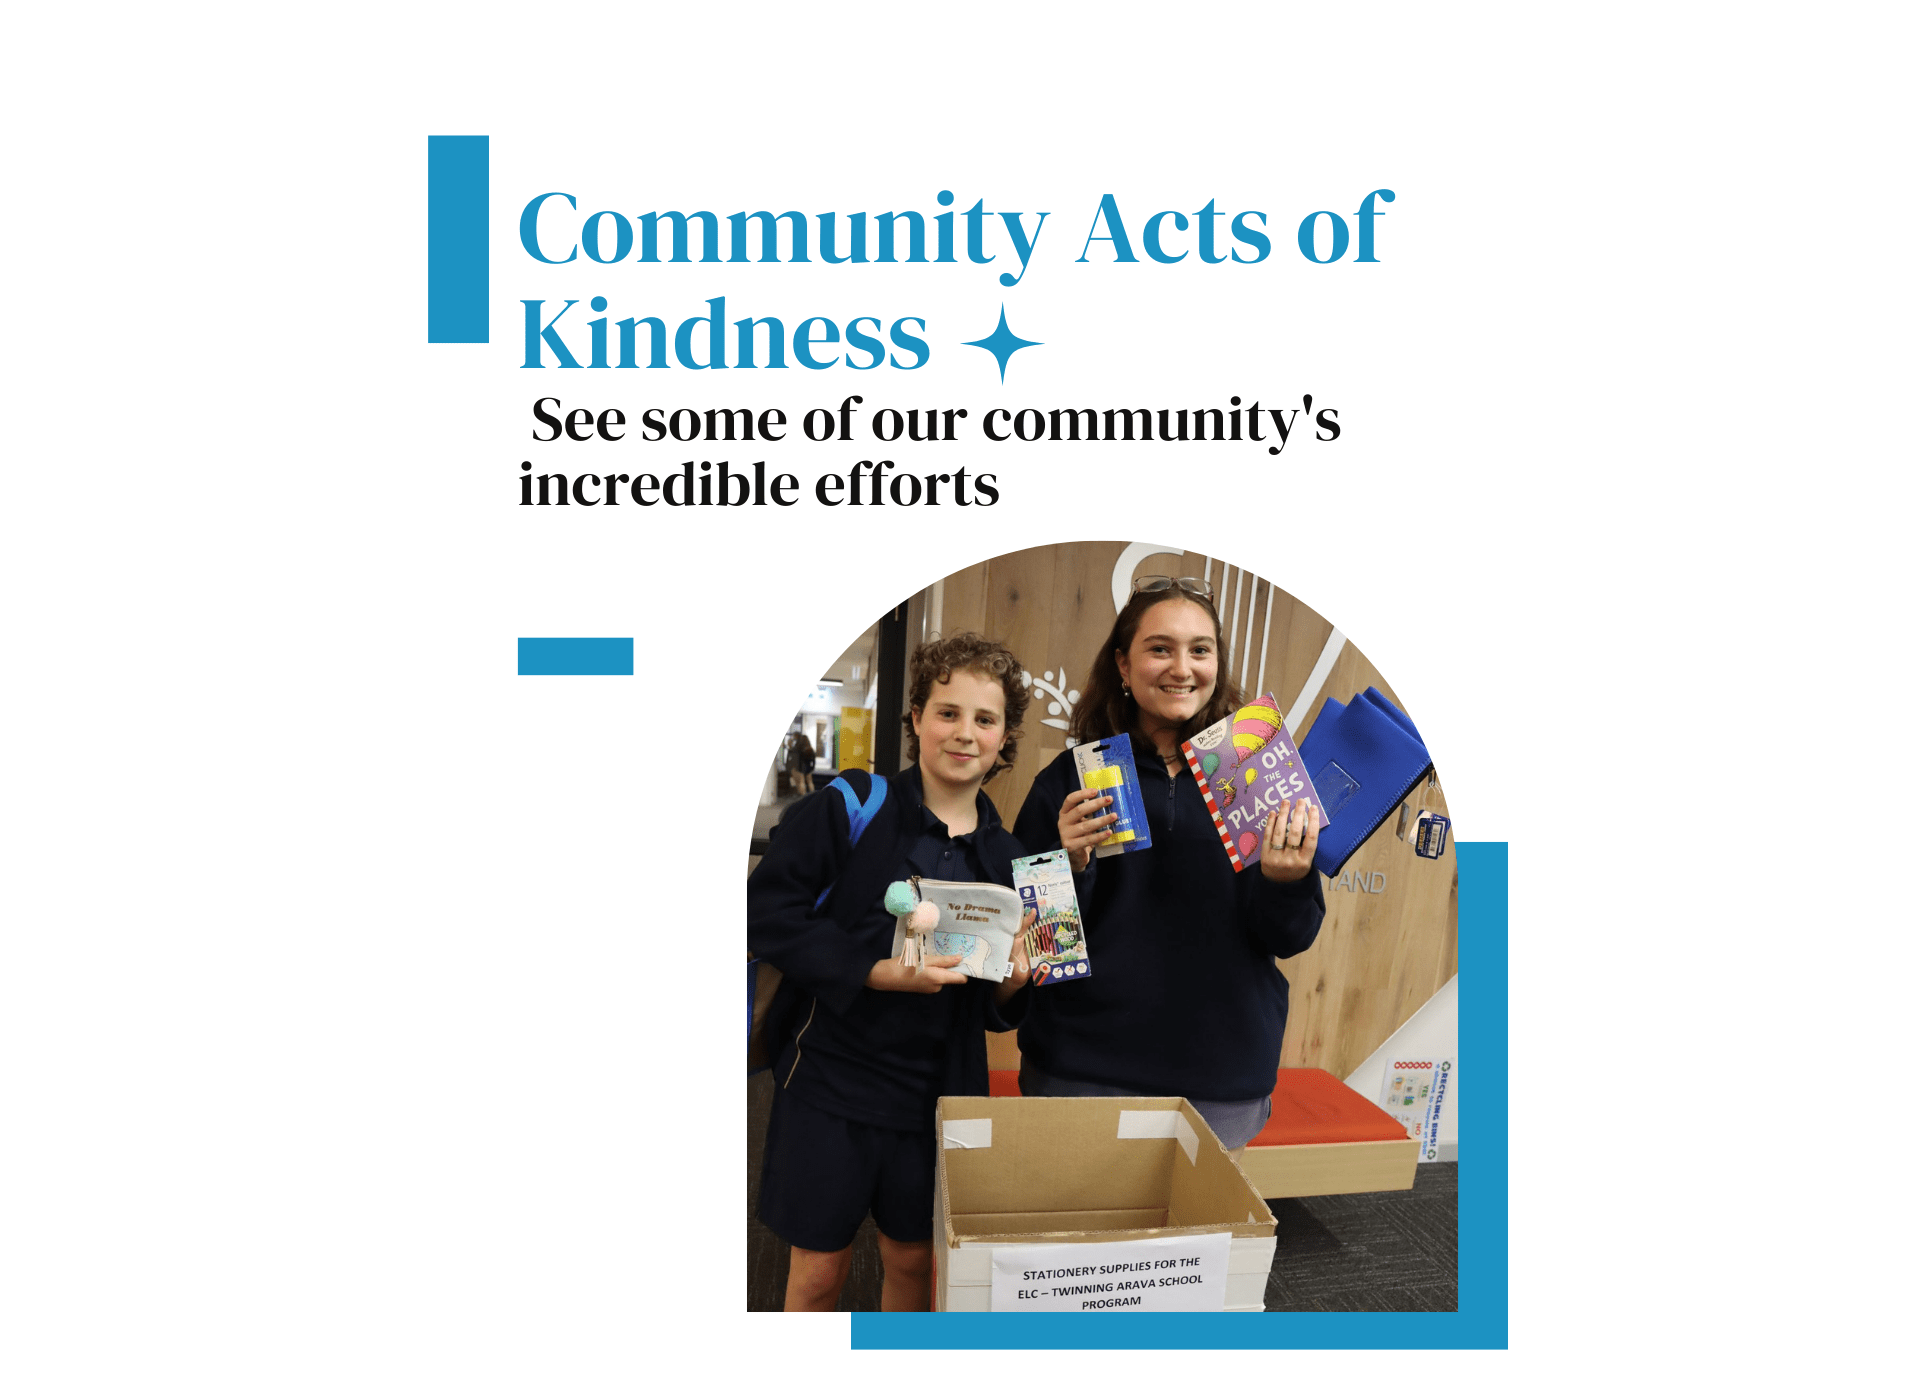 Community Acts of Kindness